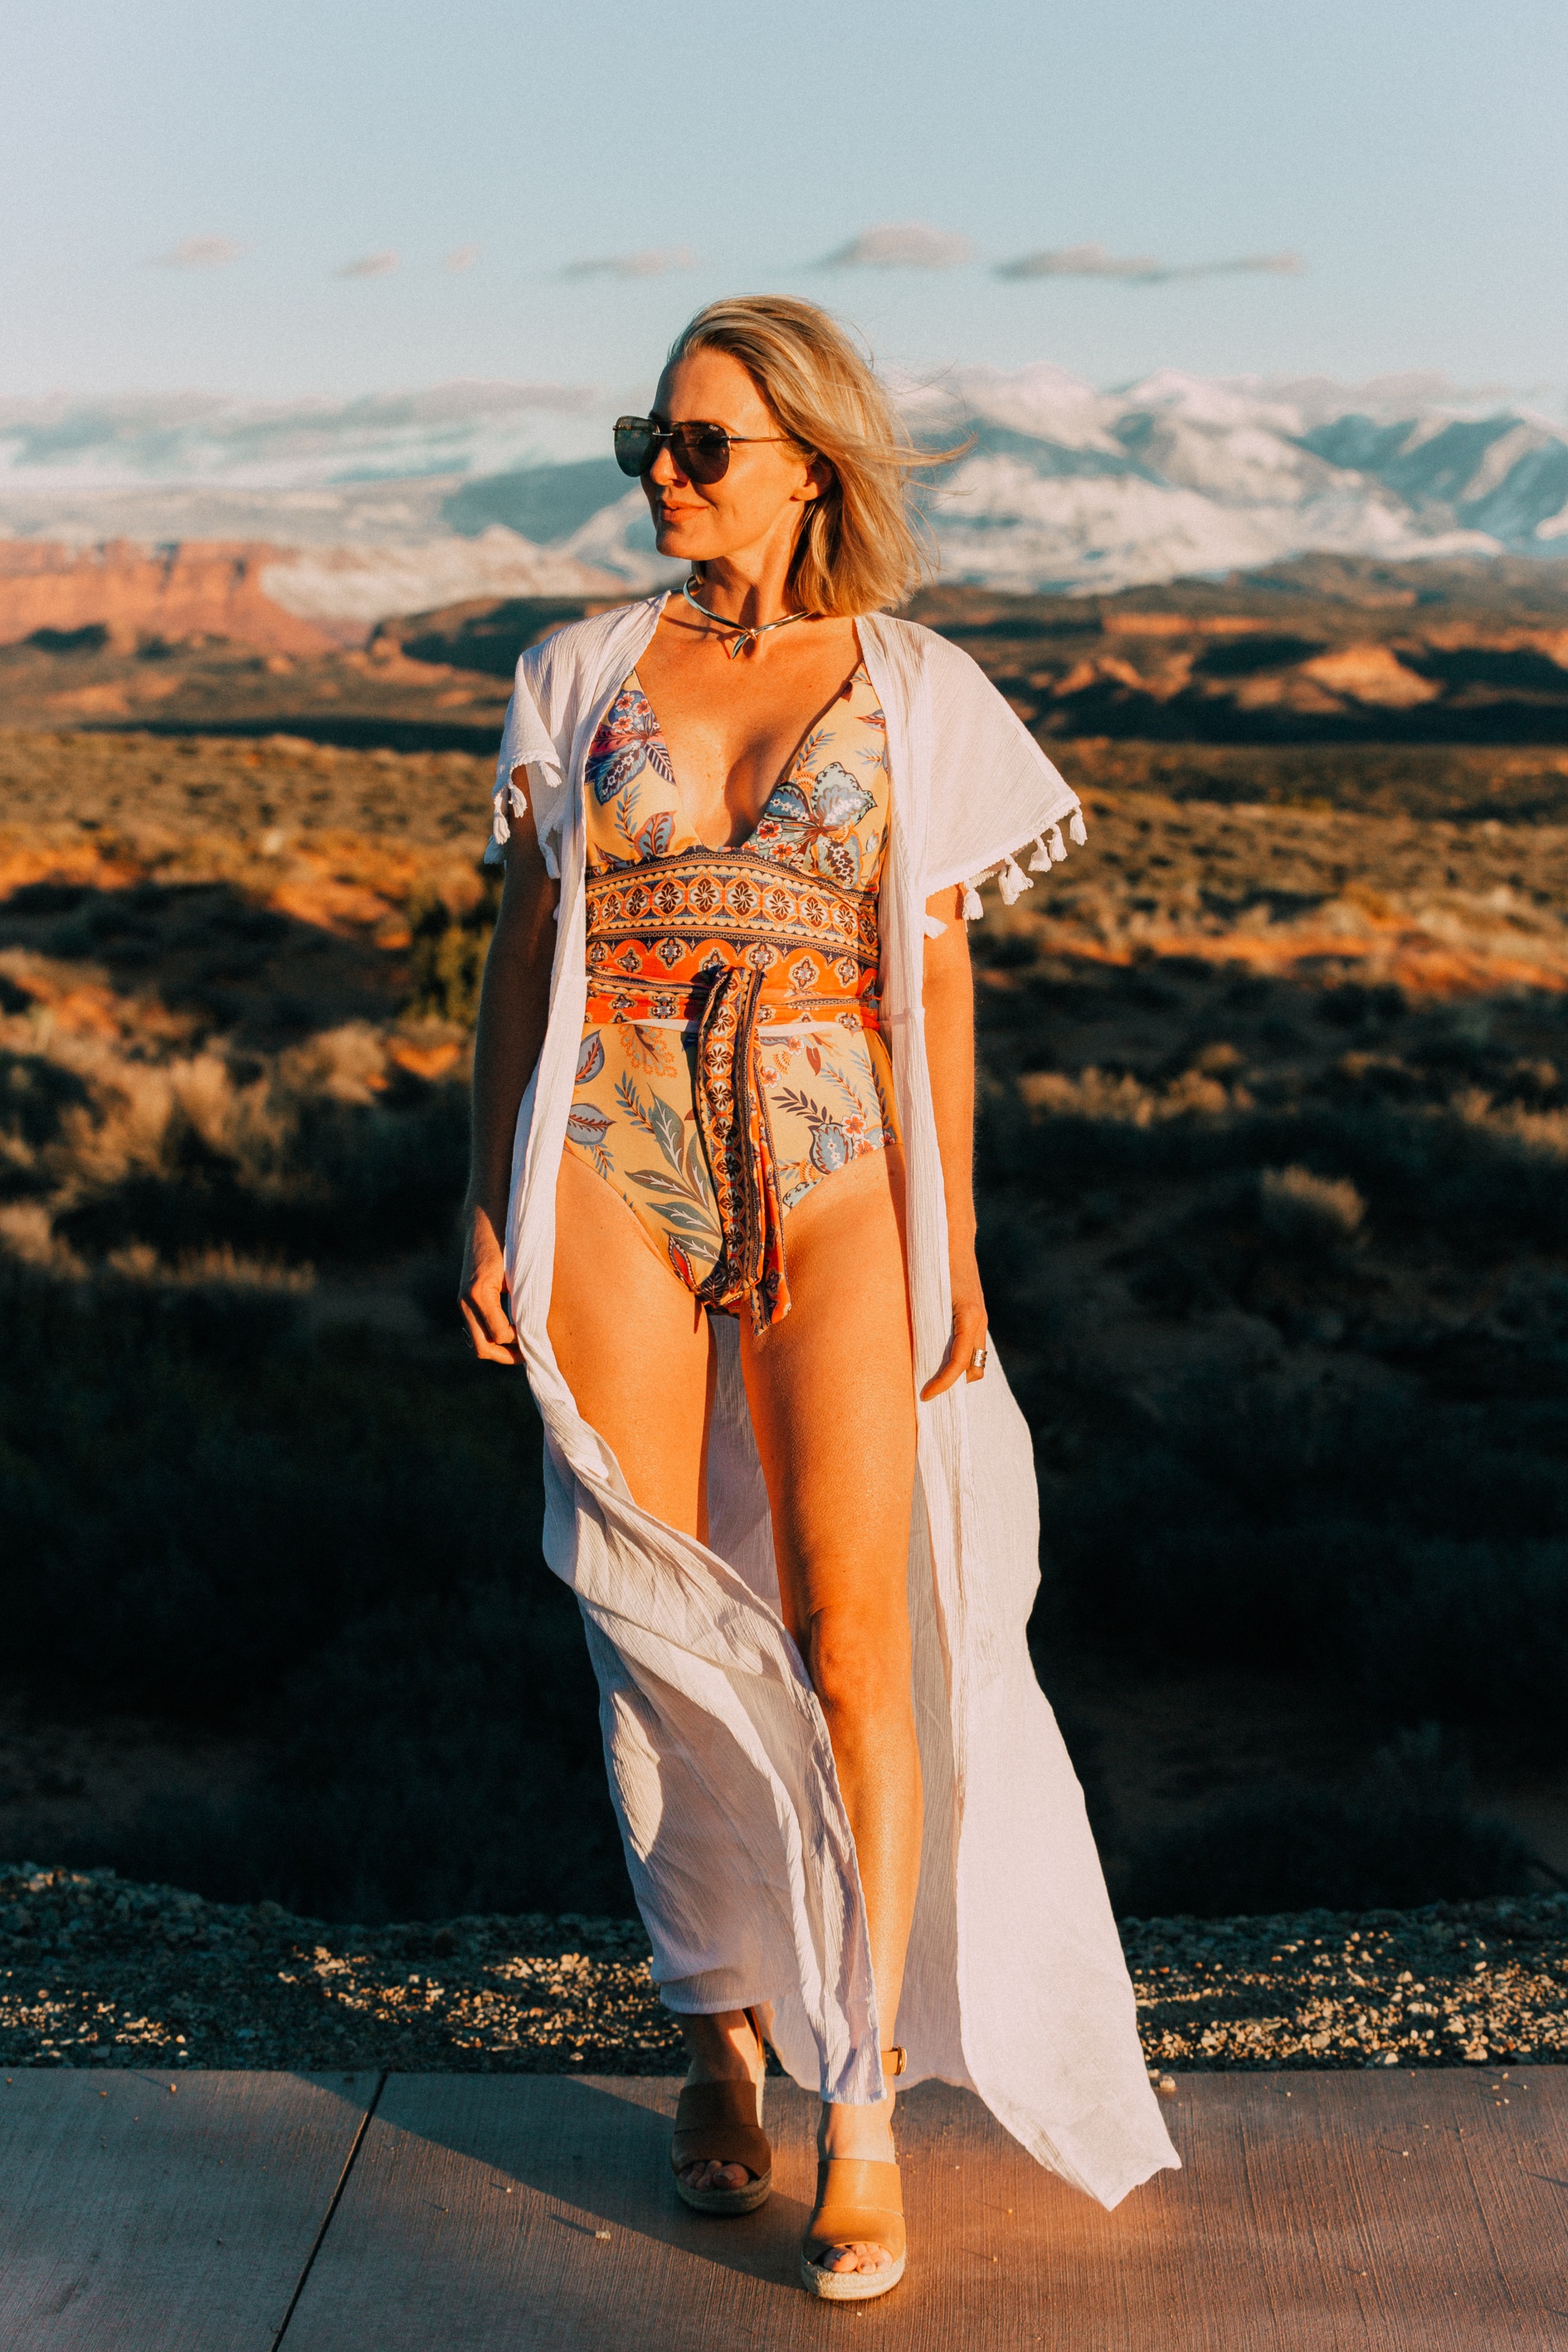 Full Coverage one piece paisley swimsuit by becca for women over 40 years old with Eddie Bargo choker necklace, Treasure & Bond espadrille sandals, and a white tassel kimono from Asos in Moab, Utah